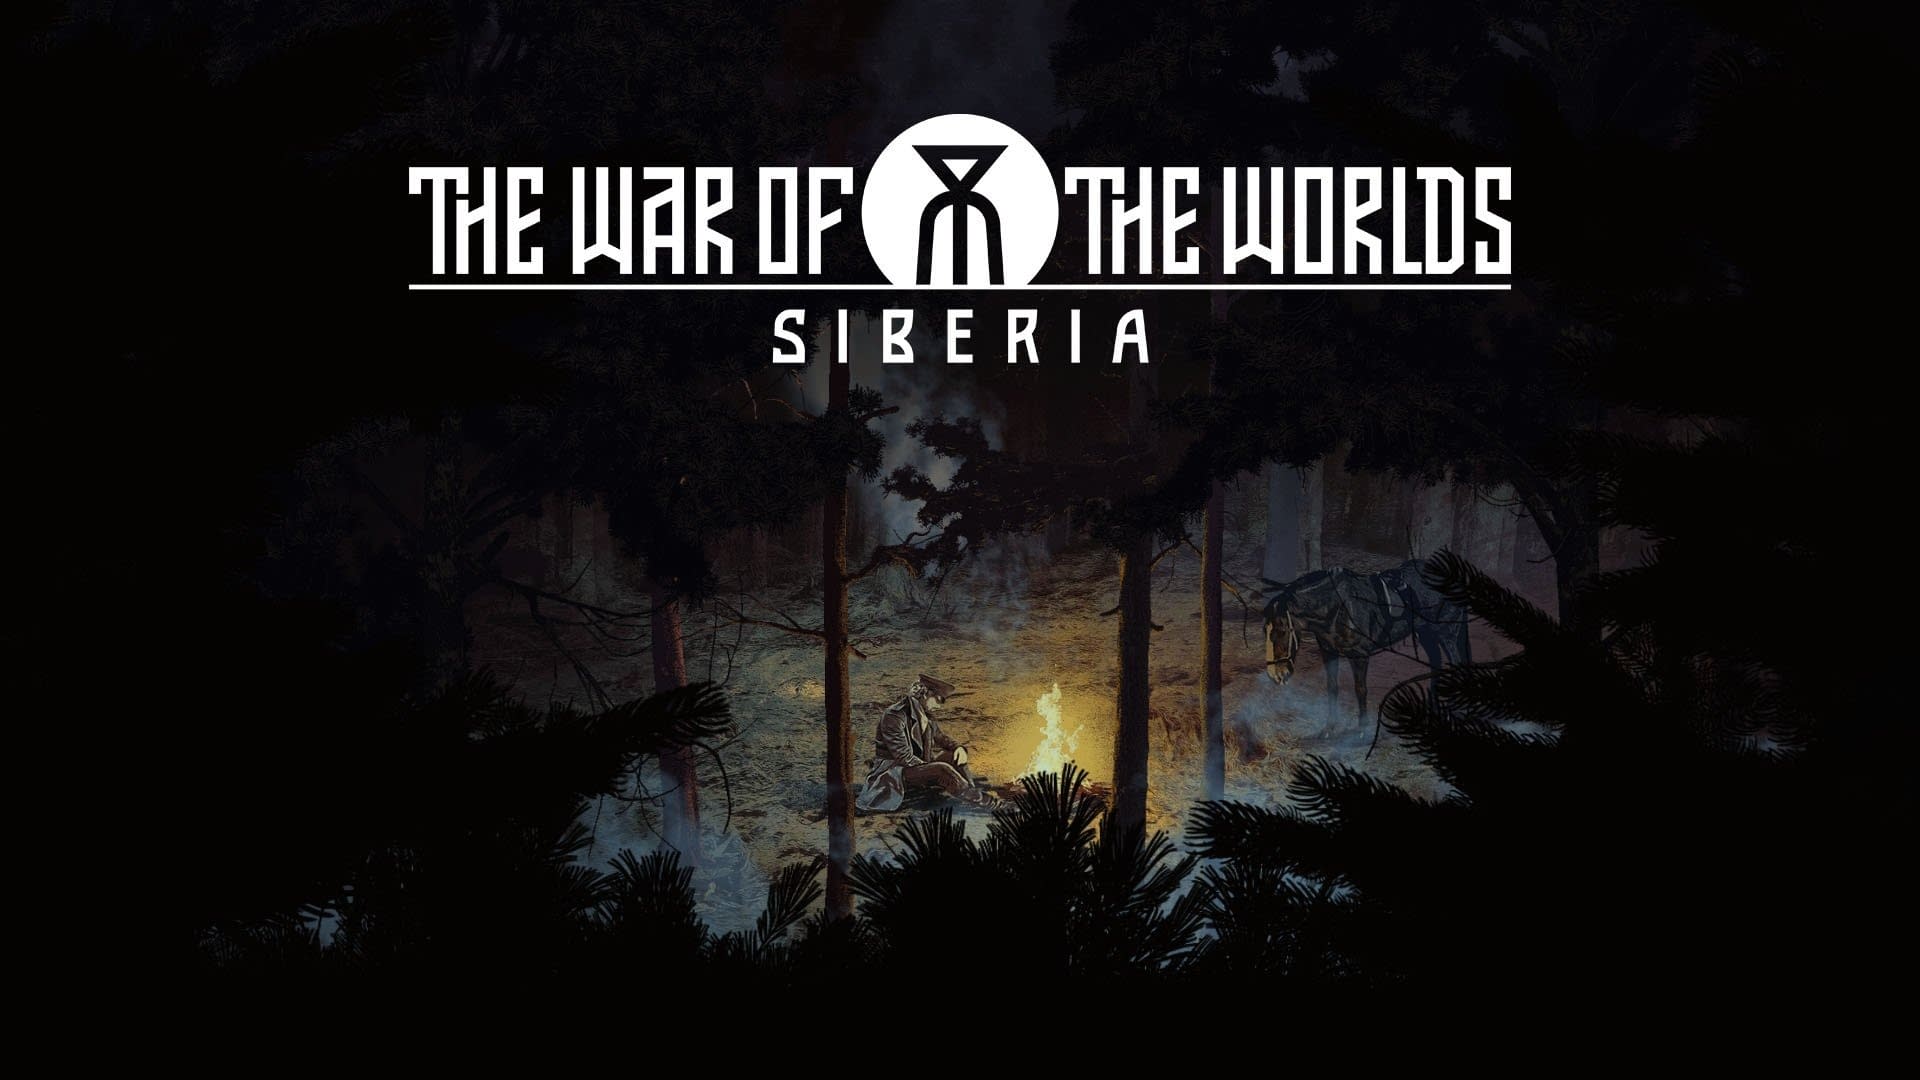 Action Adventure Game The War of the Worlds: Siberian Announcement